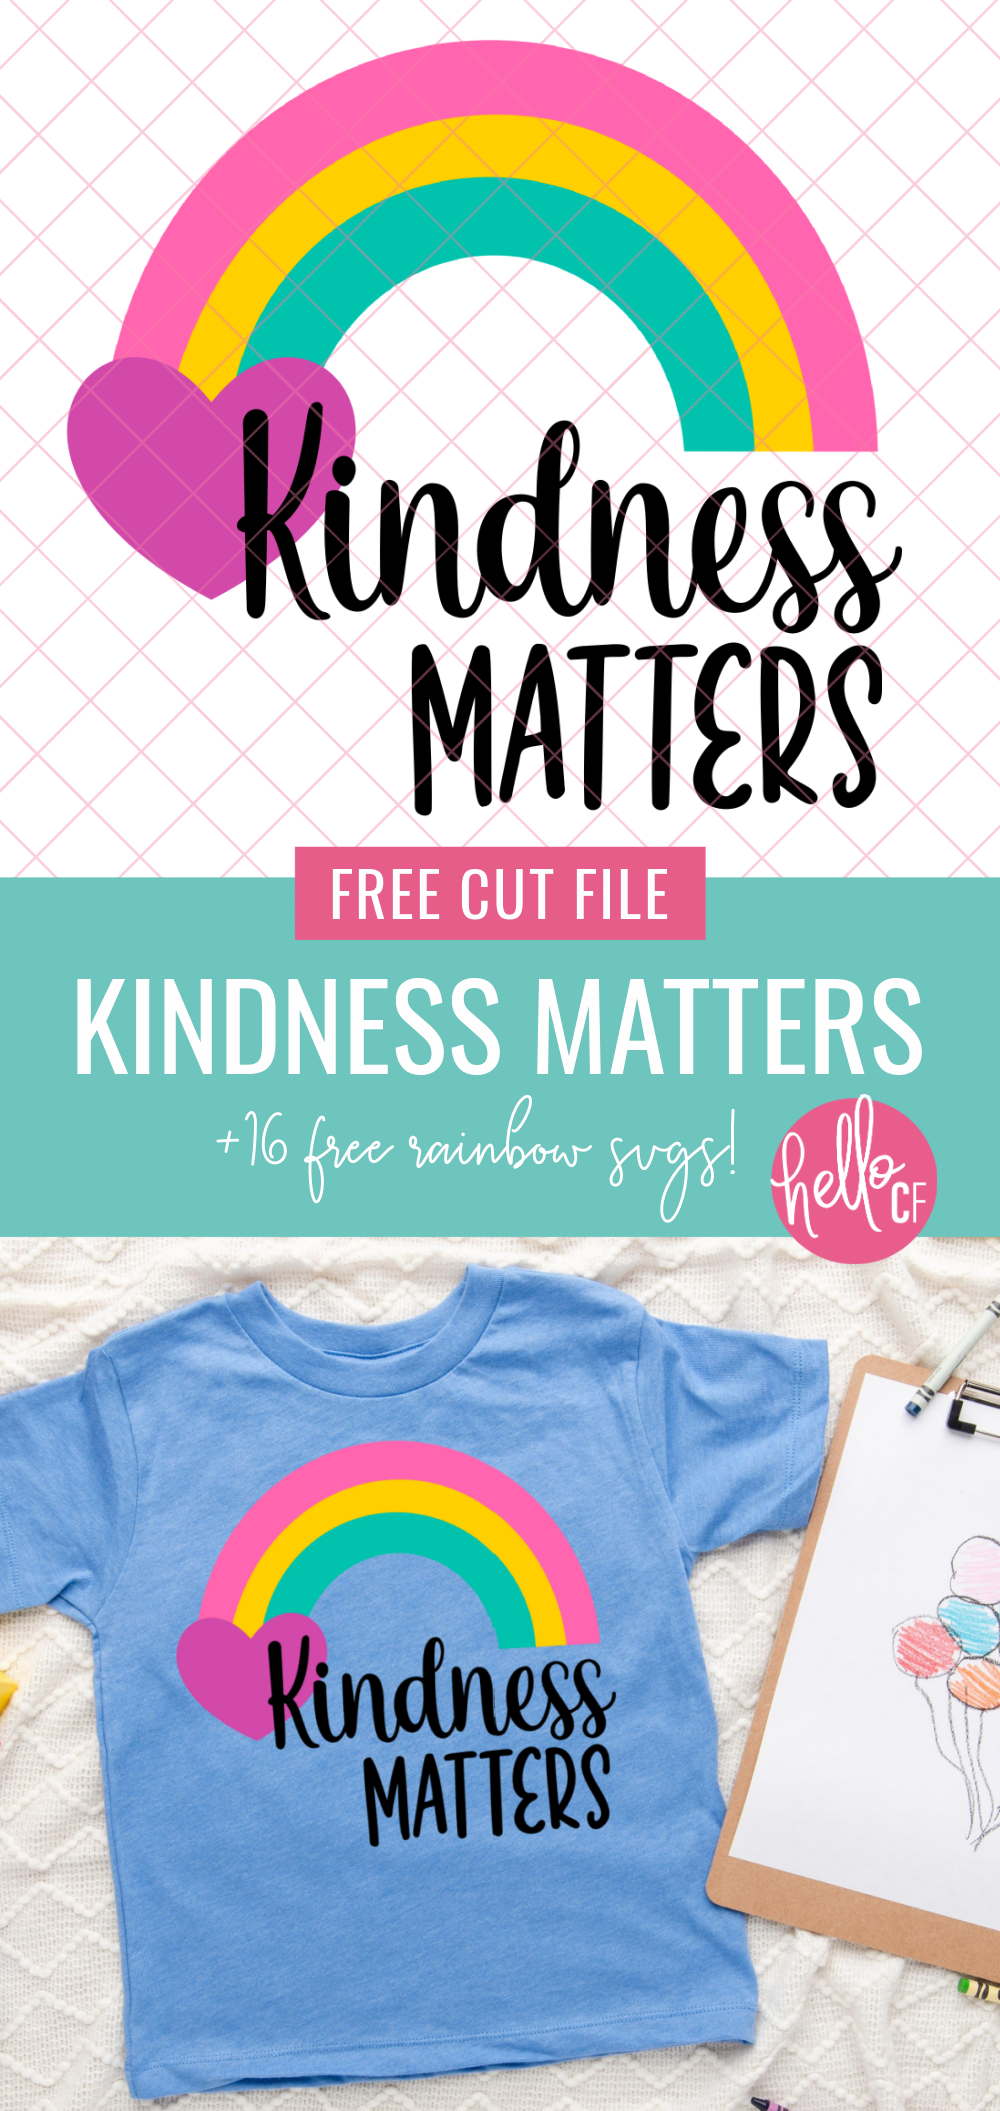 Use this free Kindness Matters SVG to make a DIY Anti Bullying Day shirt with your Cricut or Silhouette, or to spread love and kindness to those around you any day of the year! Includes links to 16 bright and colorful free Rainbow Cut Files for crafting fun! #Rainbow #RainbowCrafts #Cricut #Silhouette #CricutMaker #CricutExplore #Crafting #Kindness #KindnessMatters #Antibullying